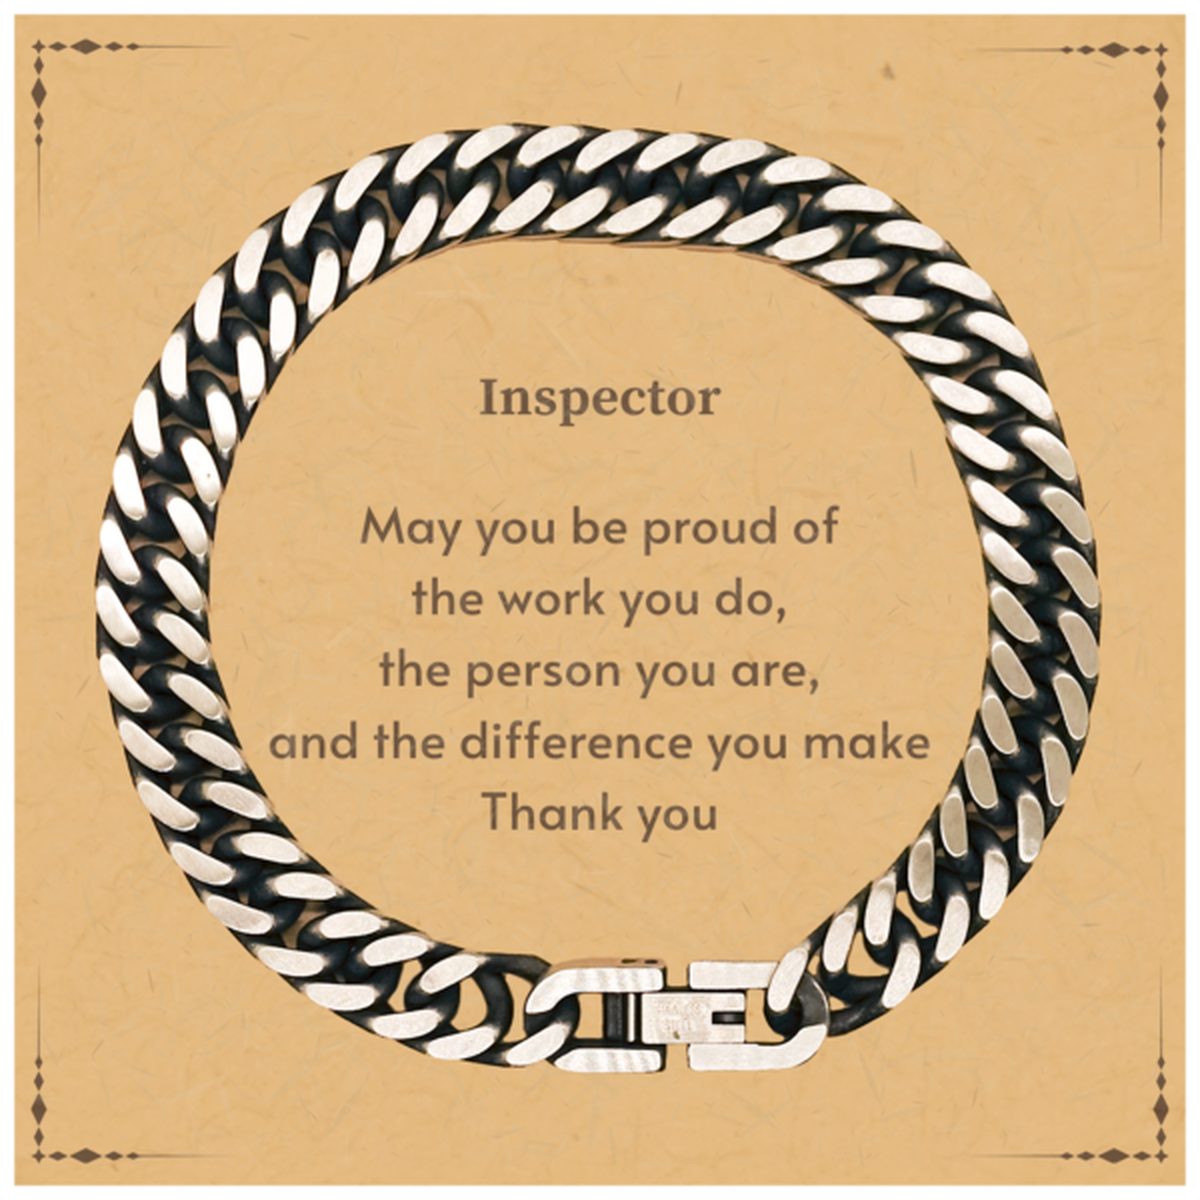 Heartwarming Cuban Link Chain Bracelet Retirement Coworkers Gifts for Inspector, Inspector May You be proud of the work you do, the person you are Gifts for Boss Men Women Friends